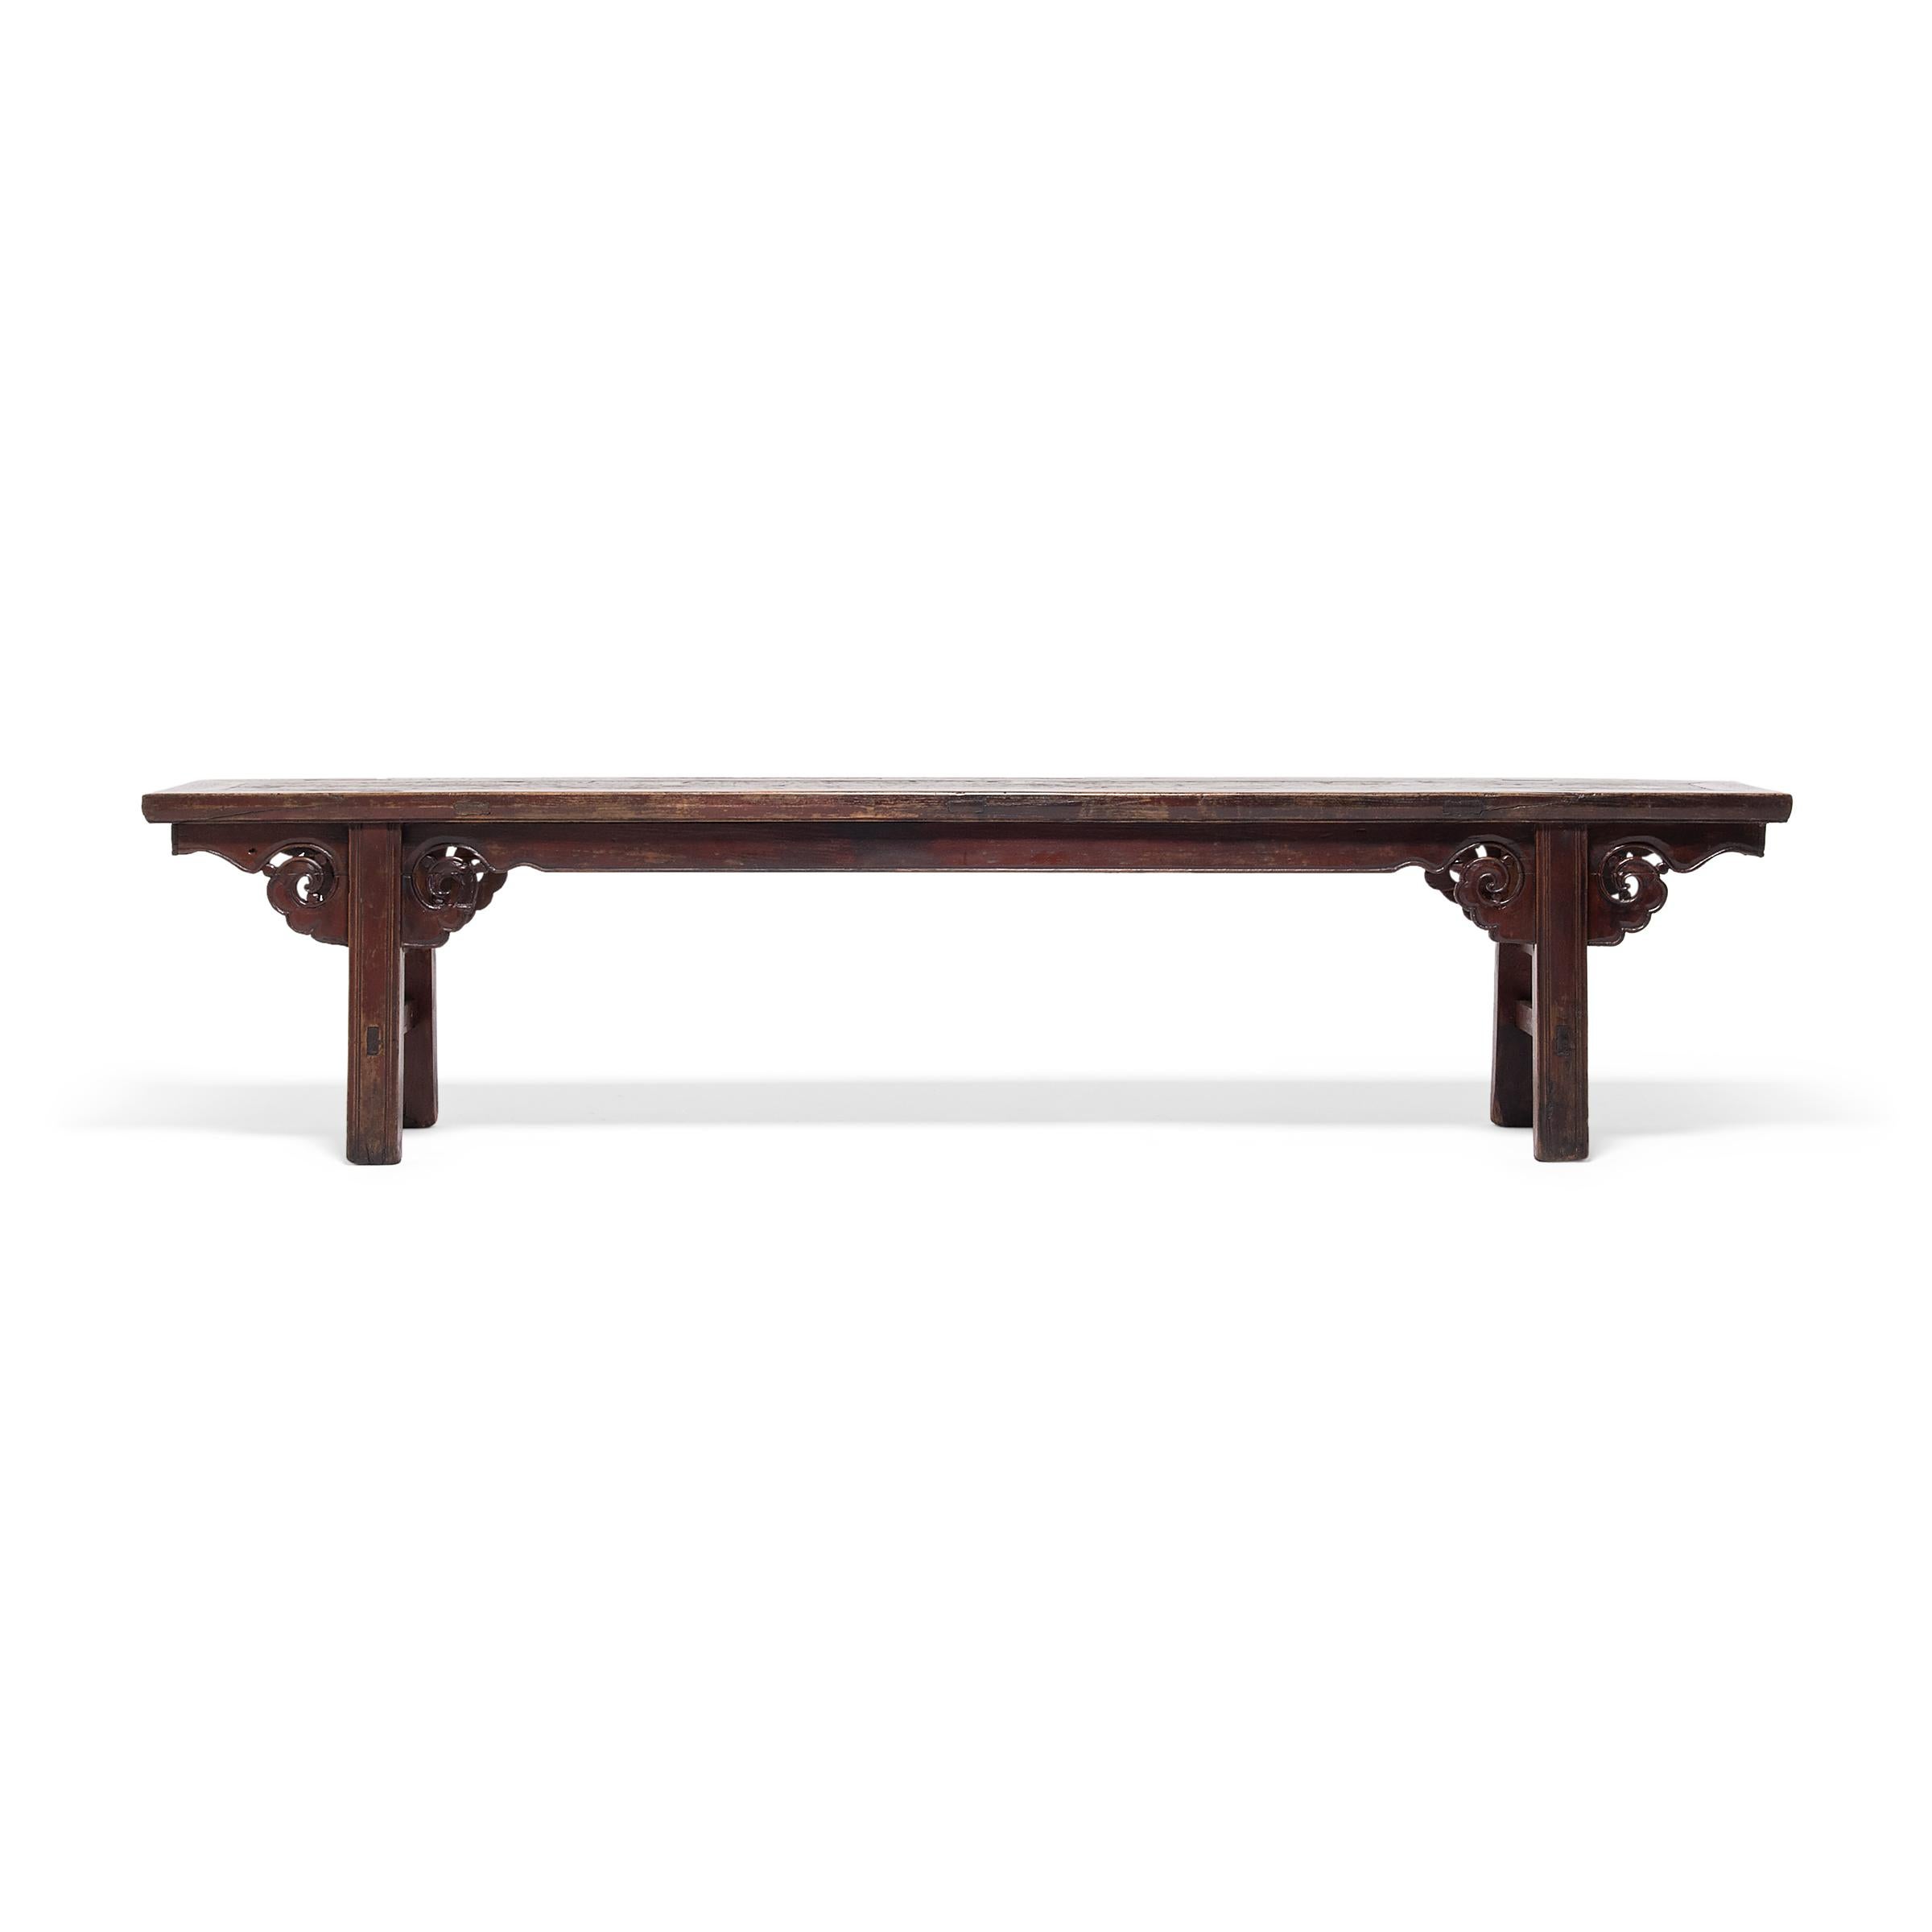 During the Qing dynasty, a preference for ornamentation introduced open work and elaborate carvings to the classic, clean lines of Ming-era furniture. Preserving the best of both styles, this beautifully executed late 19th-century bench unites the